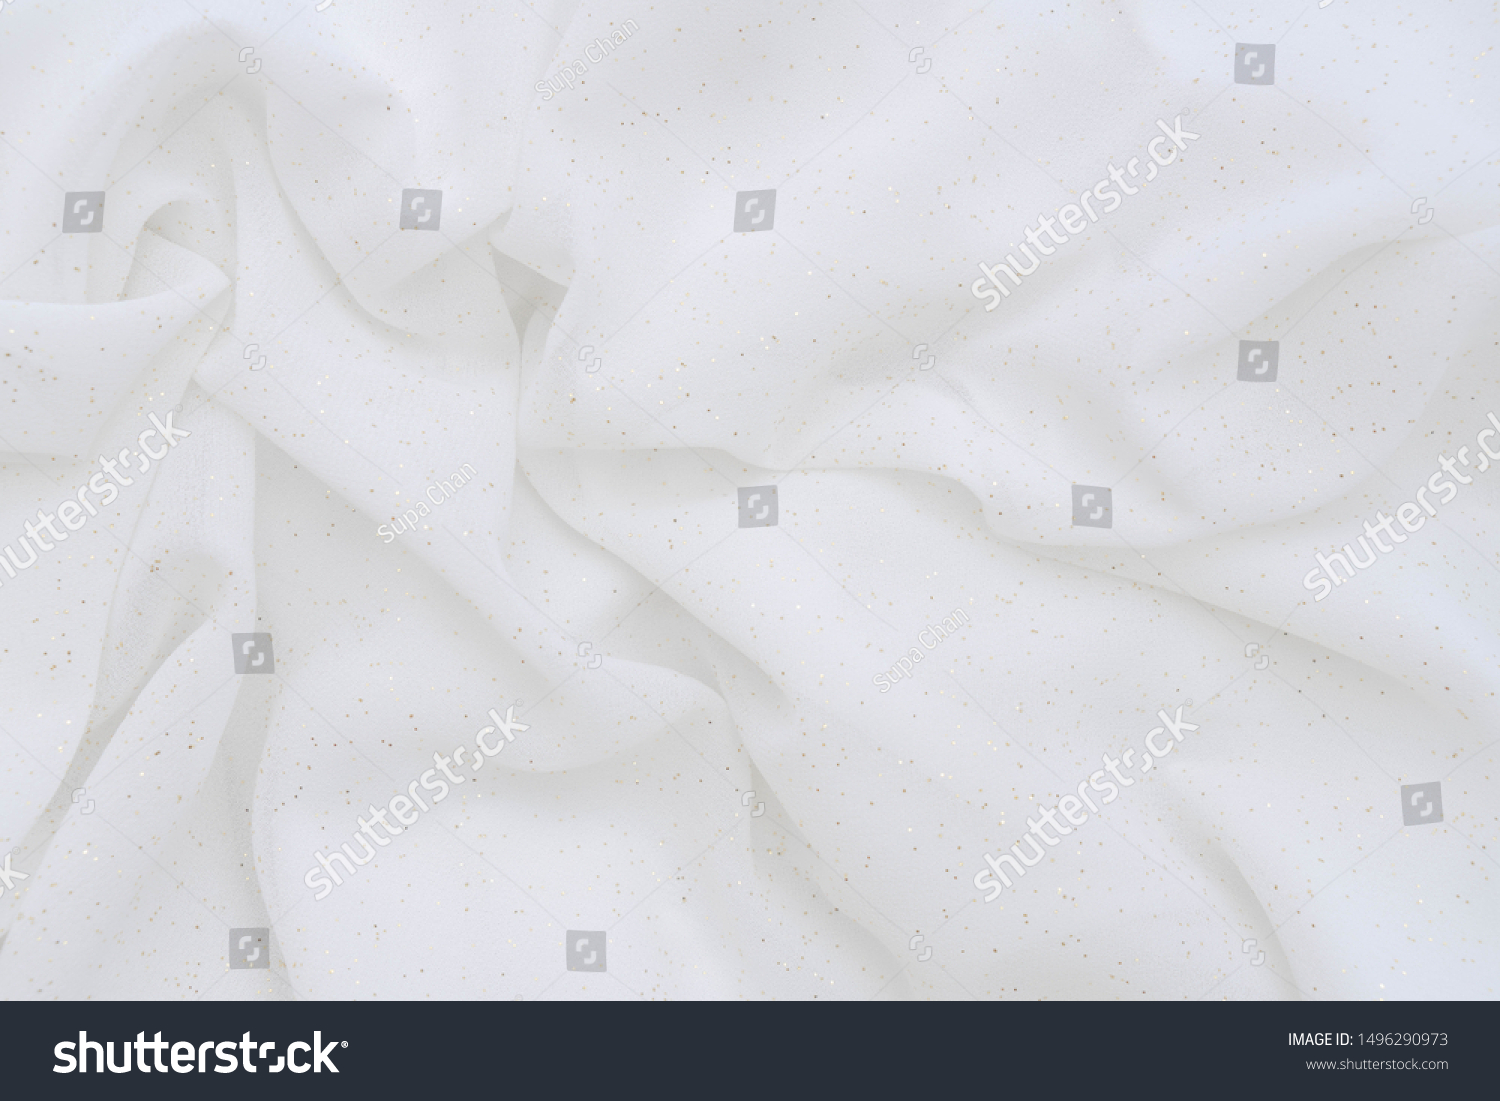 Luxury cloth texture with white fabric of silk for backdrop, wedding background. Seamless pattern of satin cotton. #1496290973